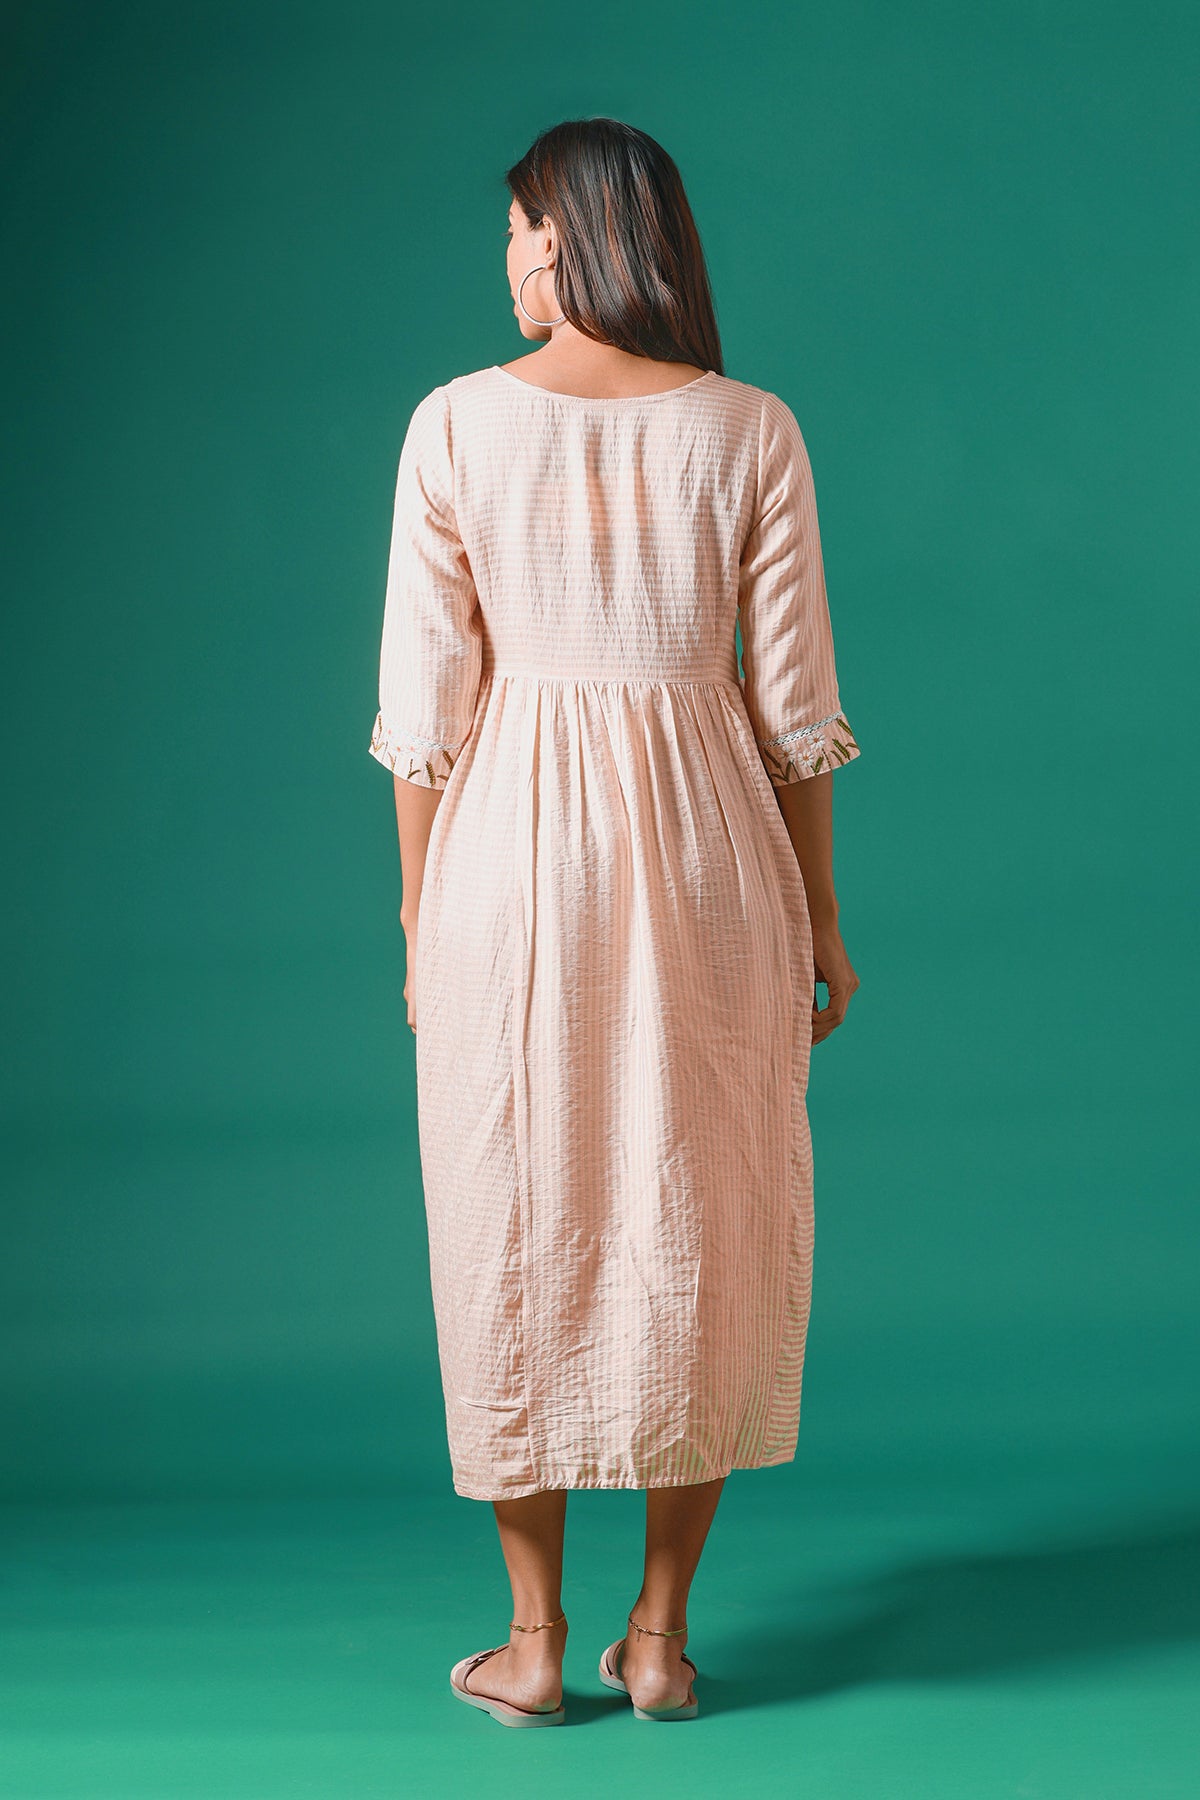 Stripes Patterned Maternity Kurta with delicate floral embroidery - Peach